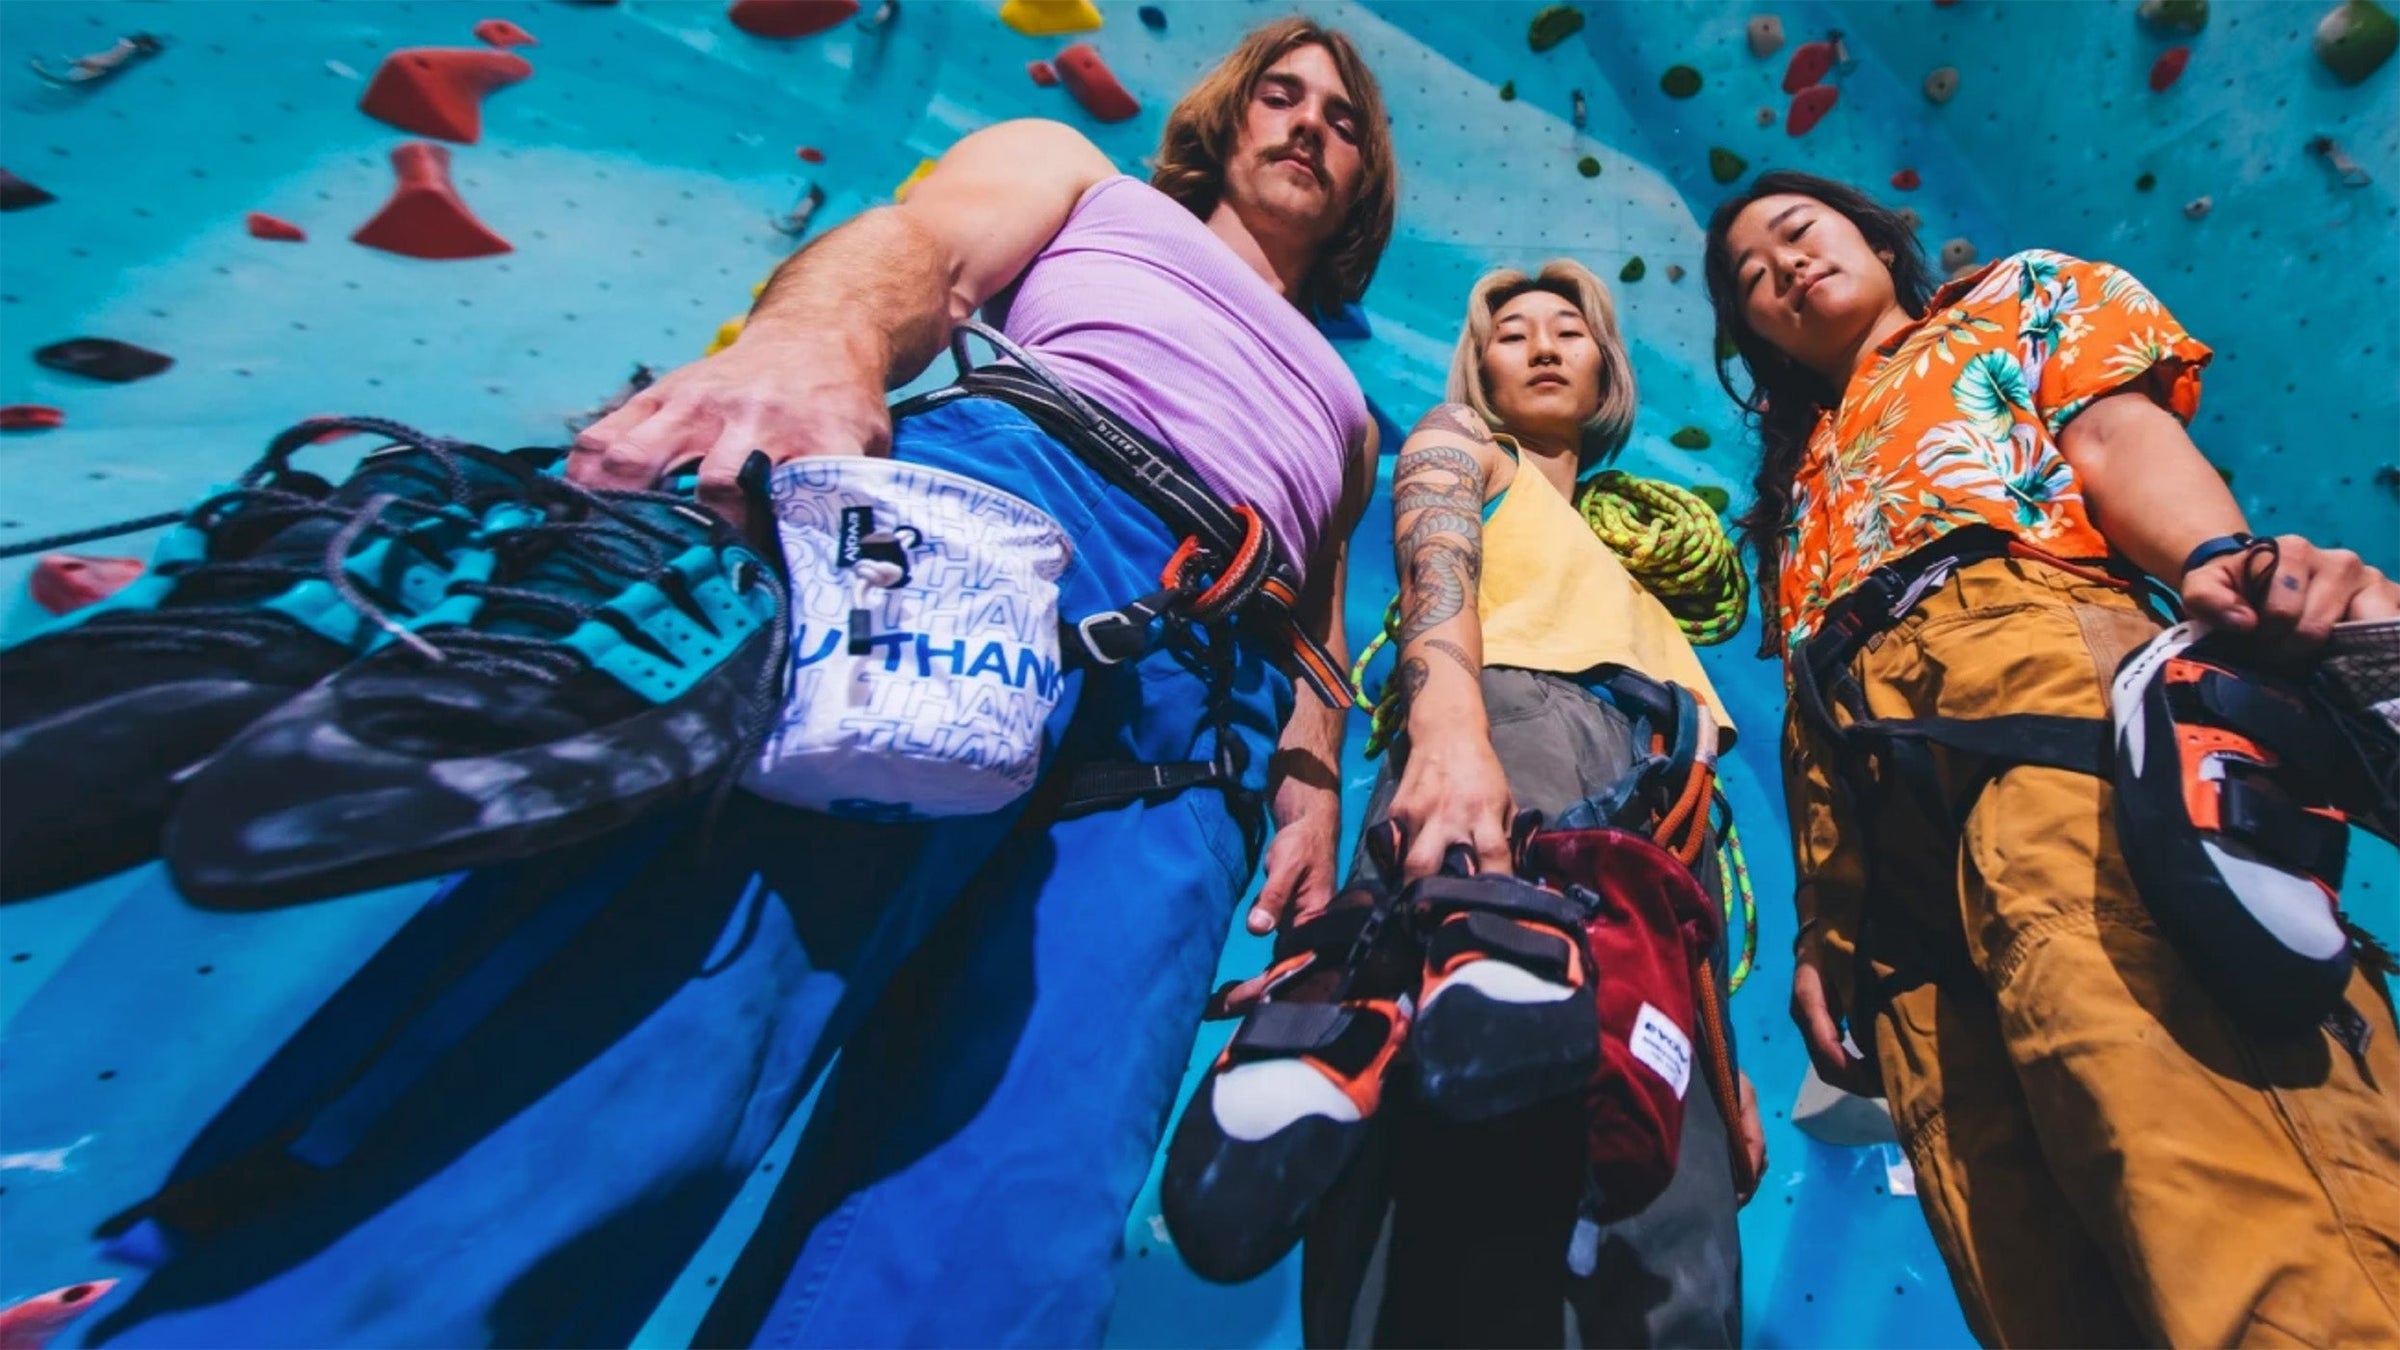 3 people holding Evolve rock climbing shoes in a gym